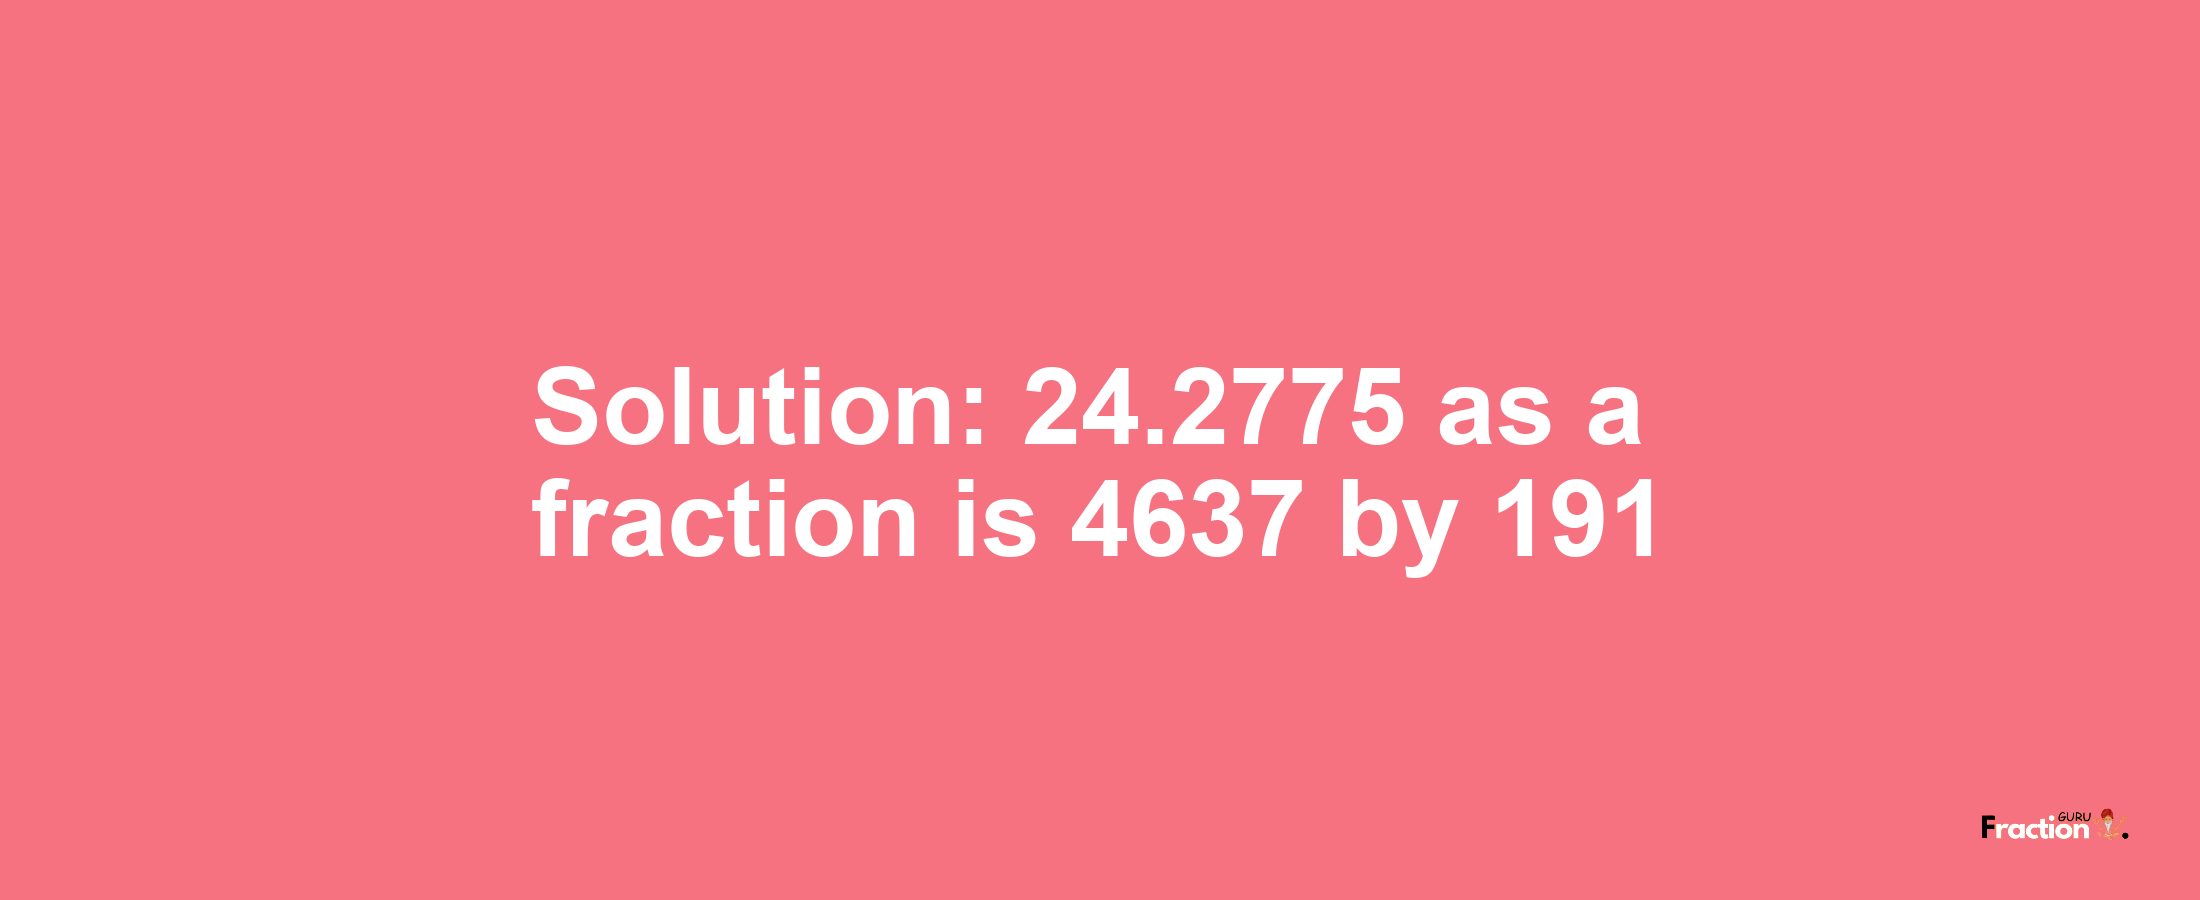 Solution:24.2775 as a fraction is 4637/191